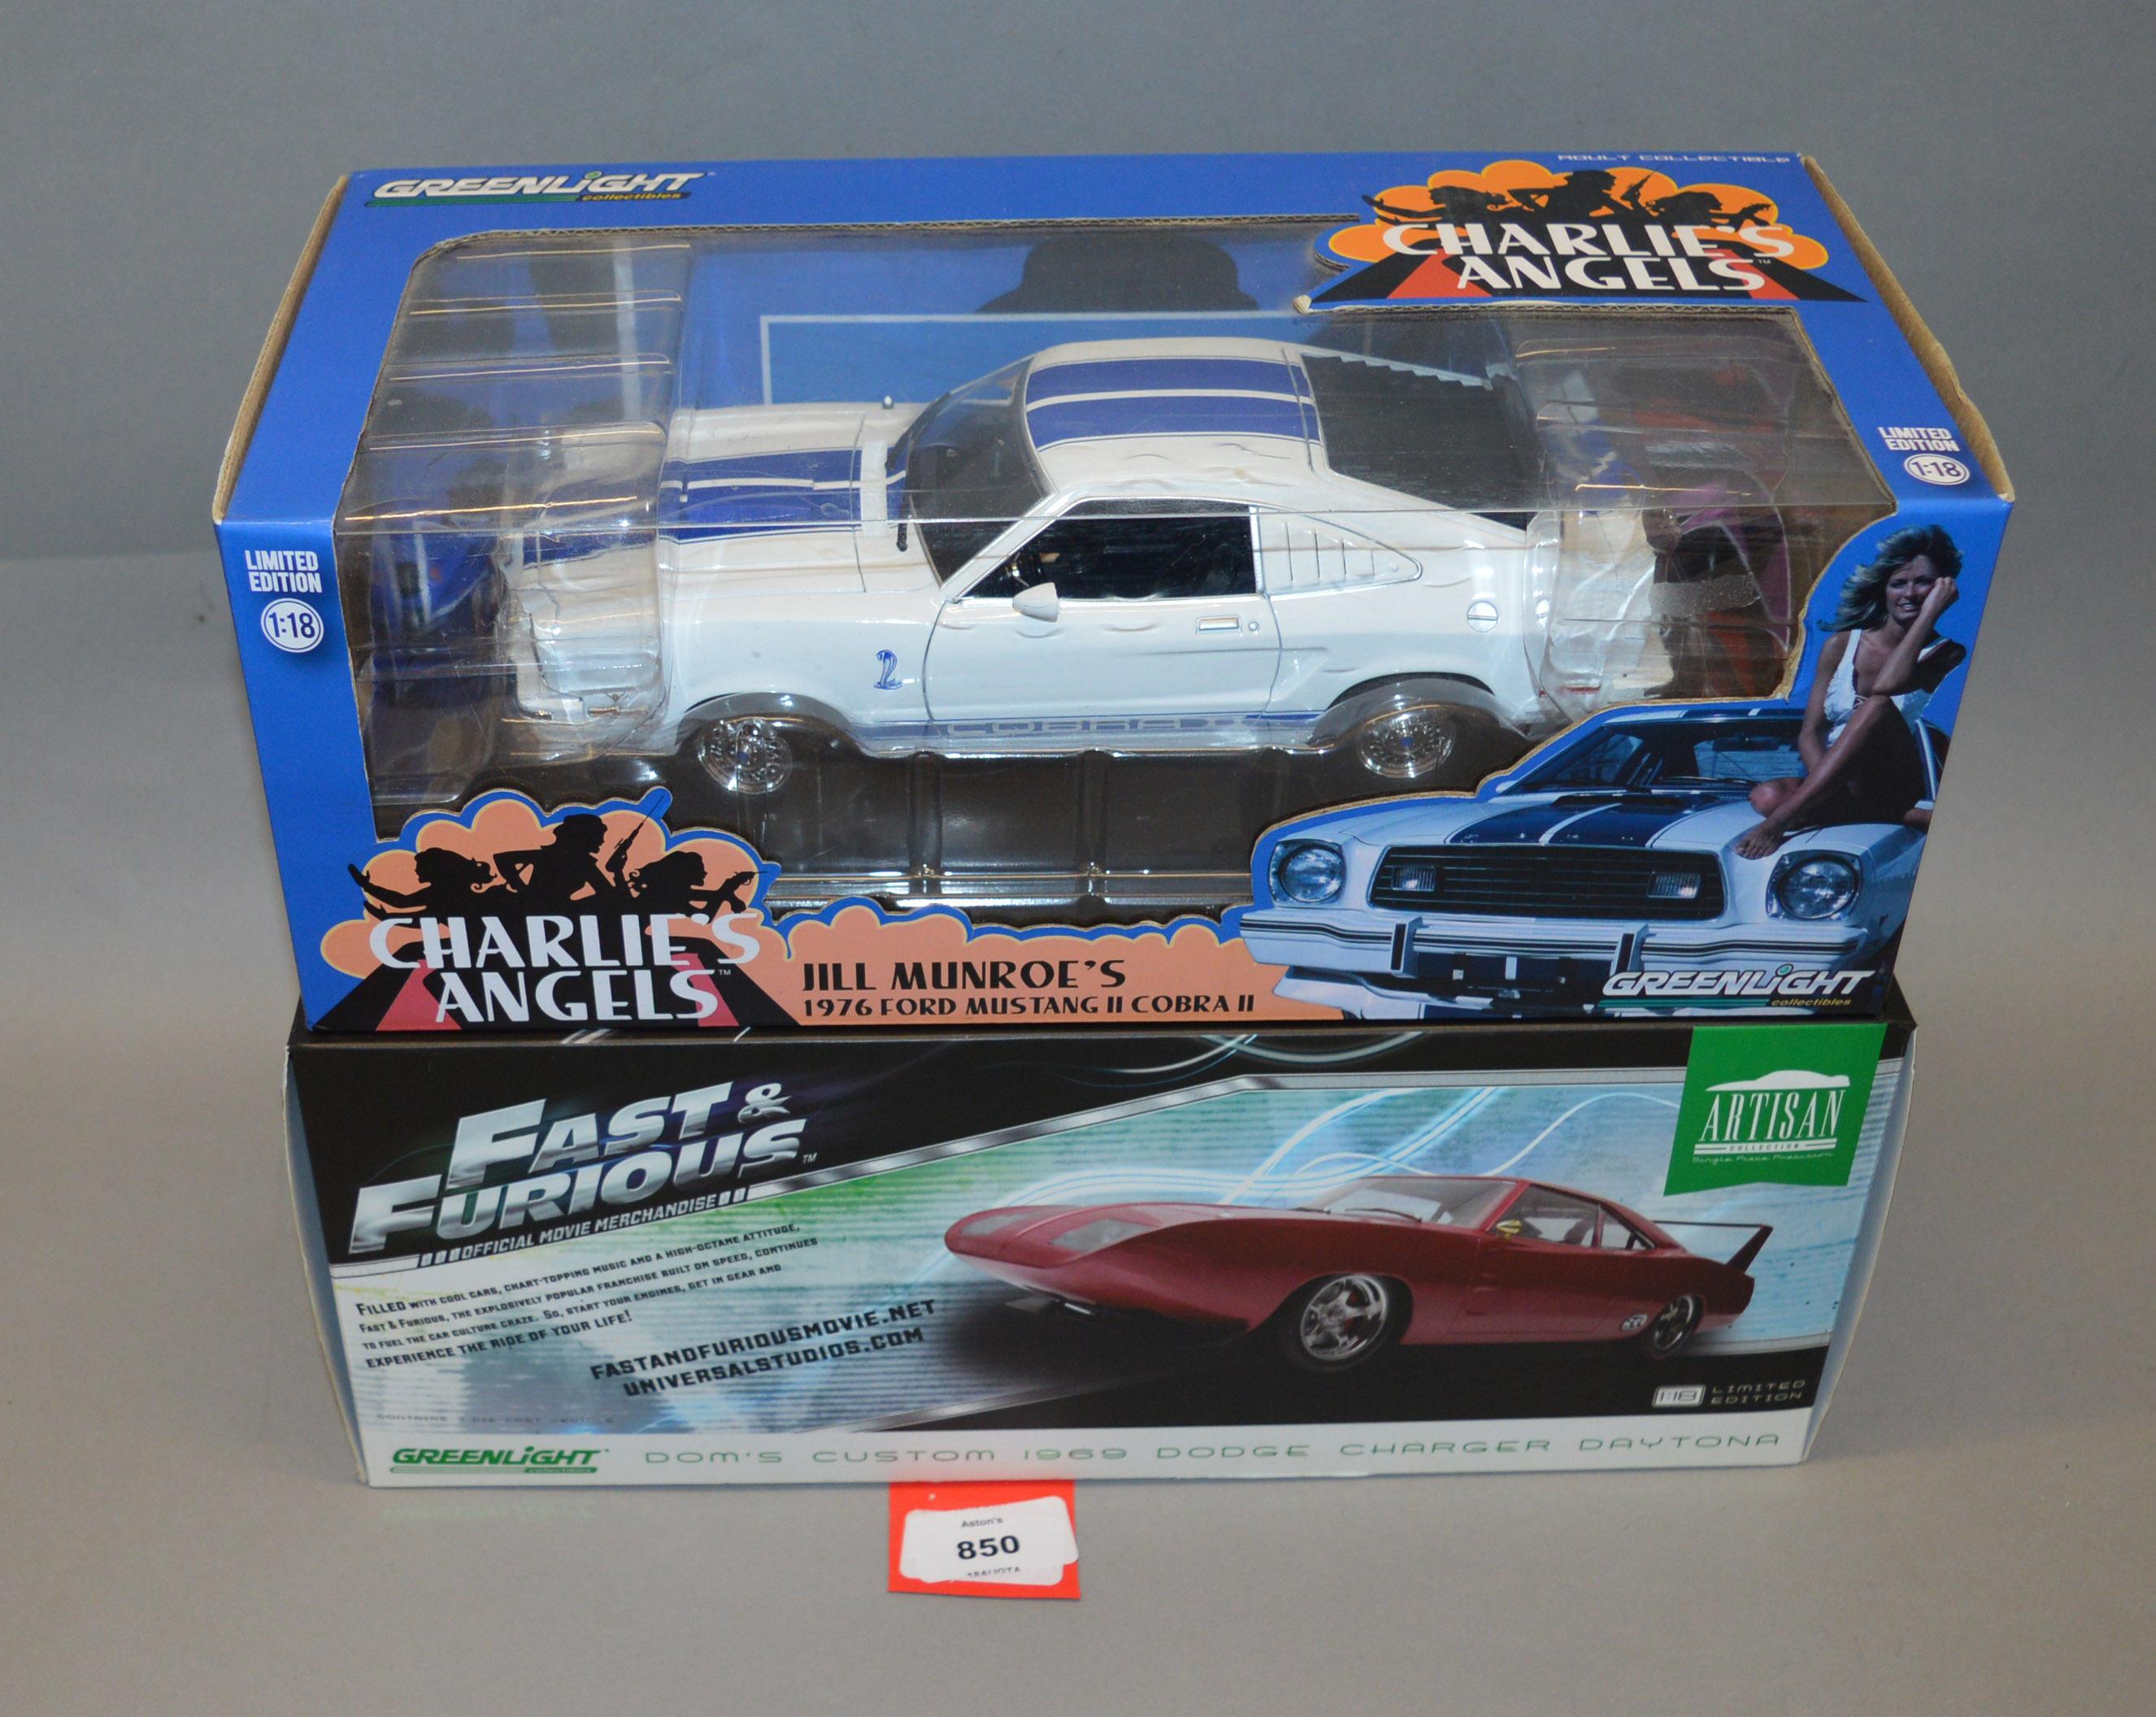 Four boxed Film and TV related diecast model cars in 1:18 scale, - Image 2 of 2